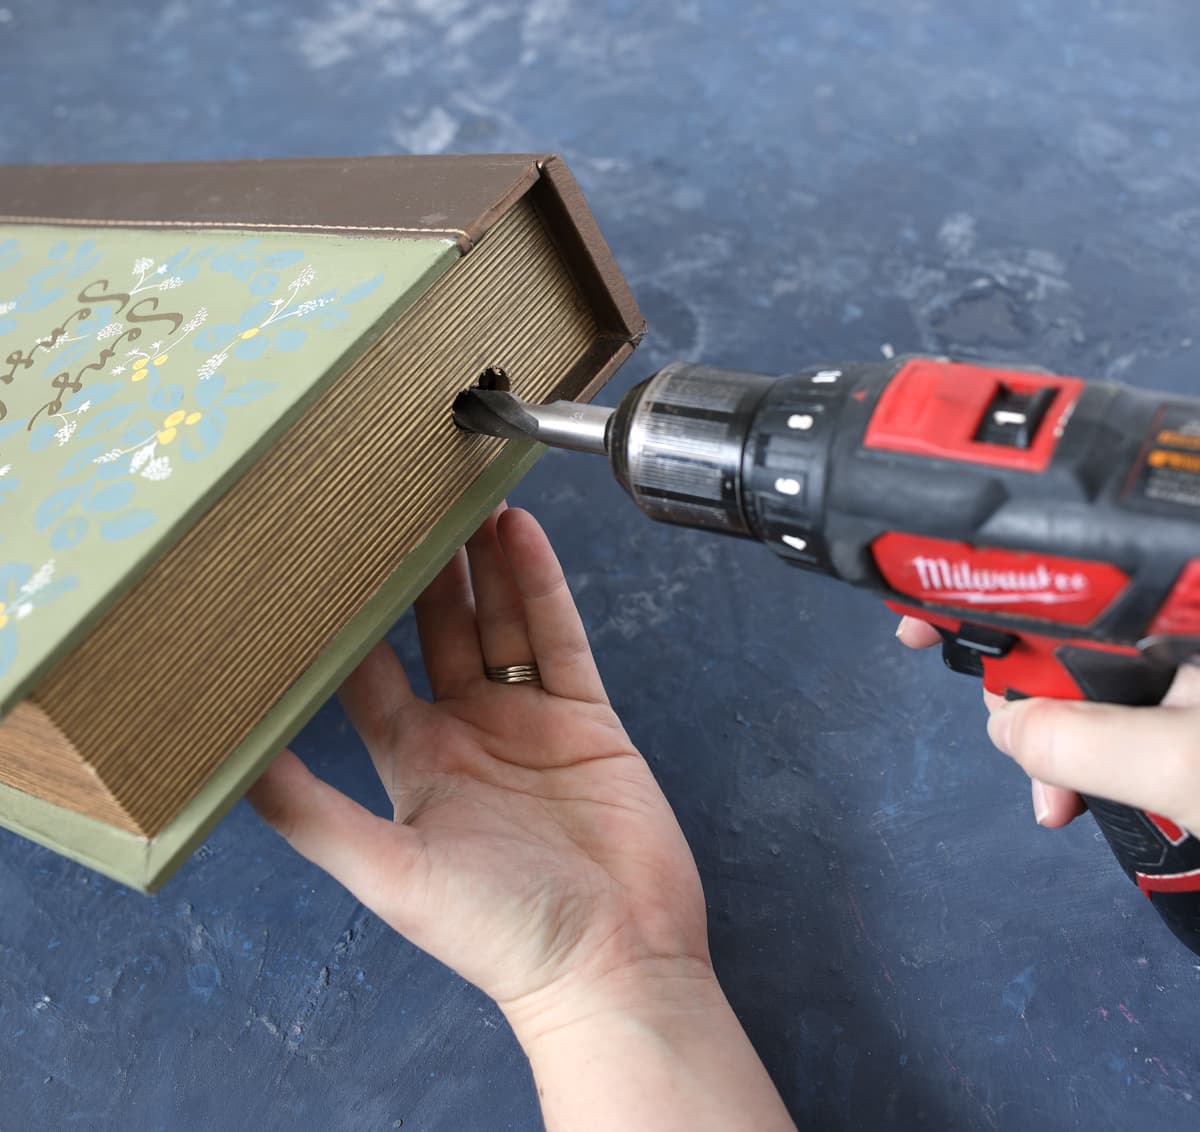 drilling a hole in a book box